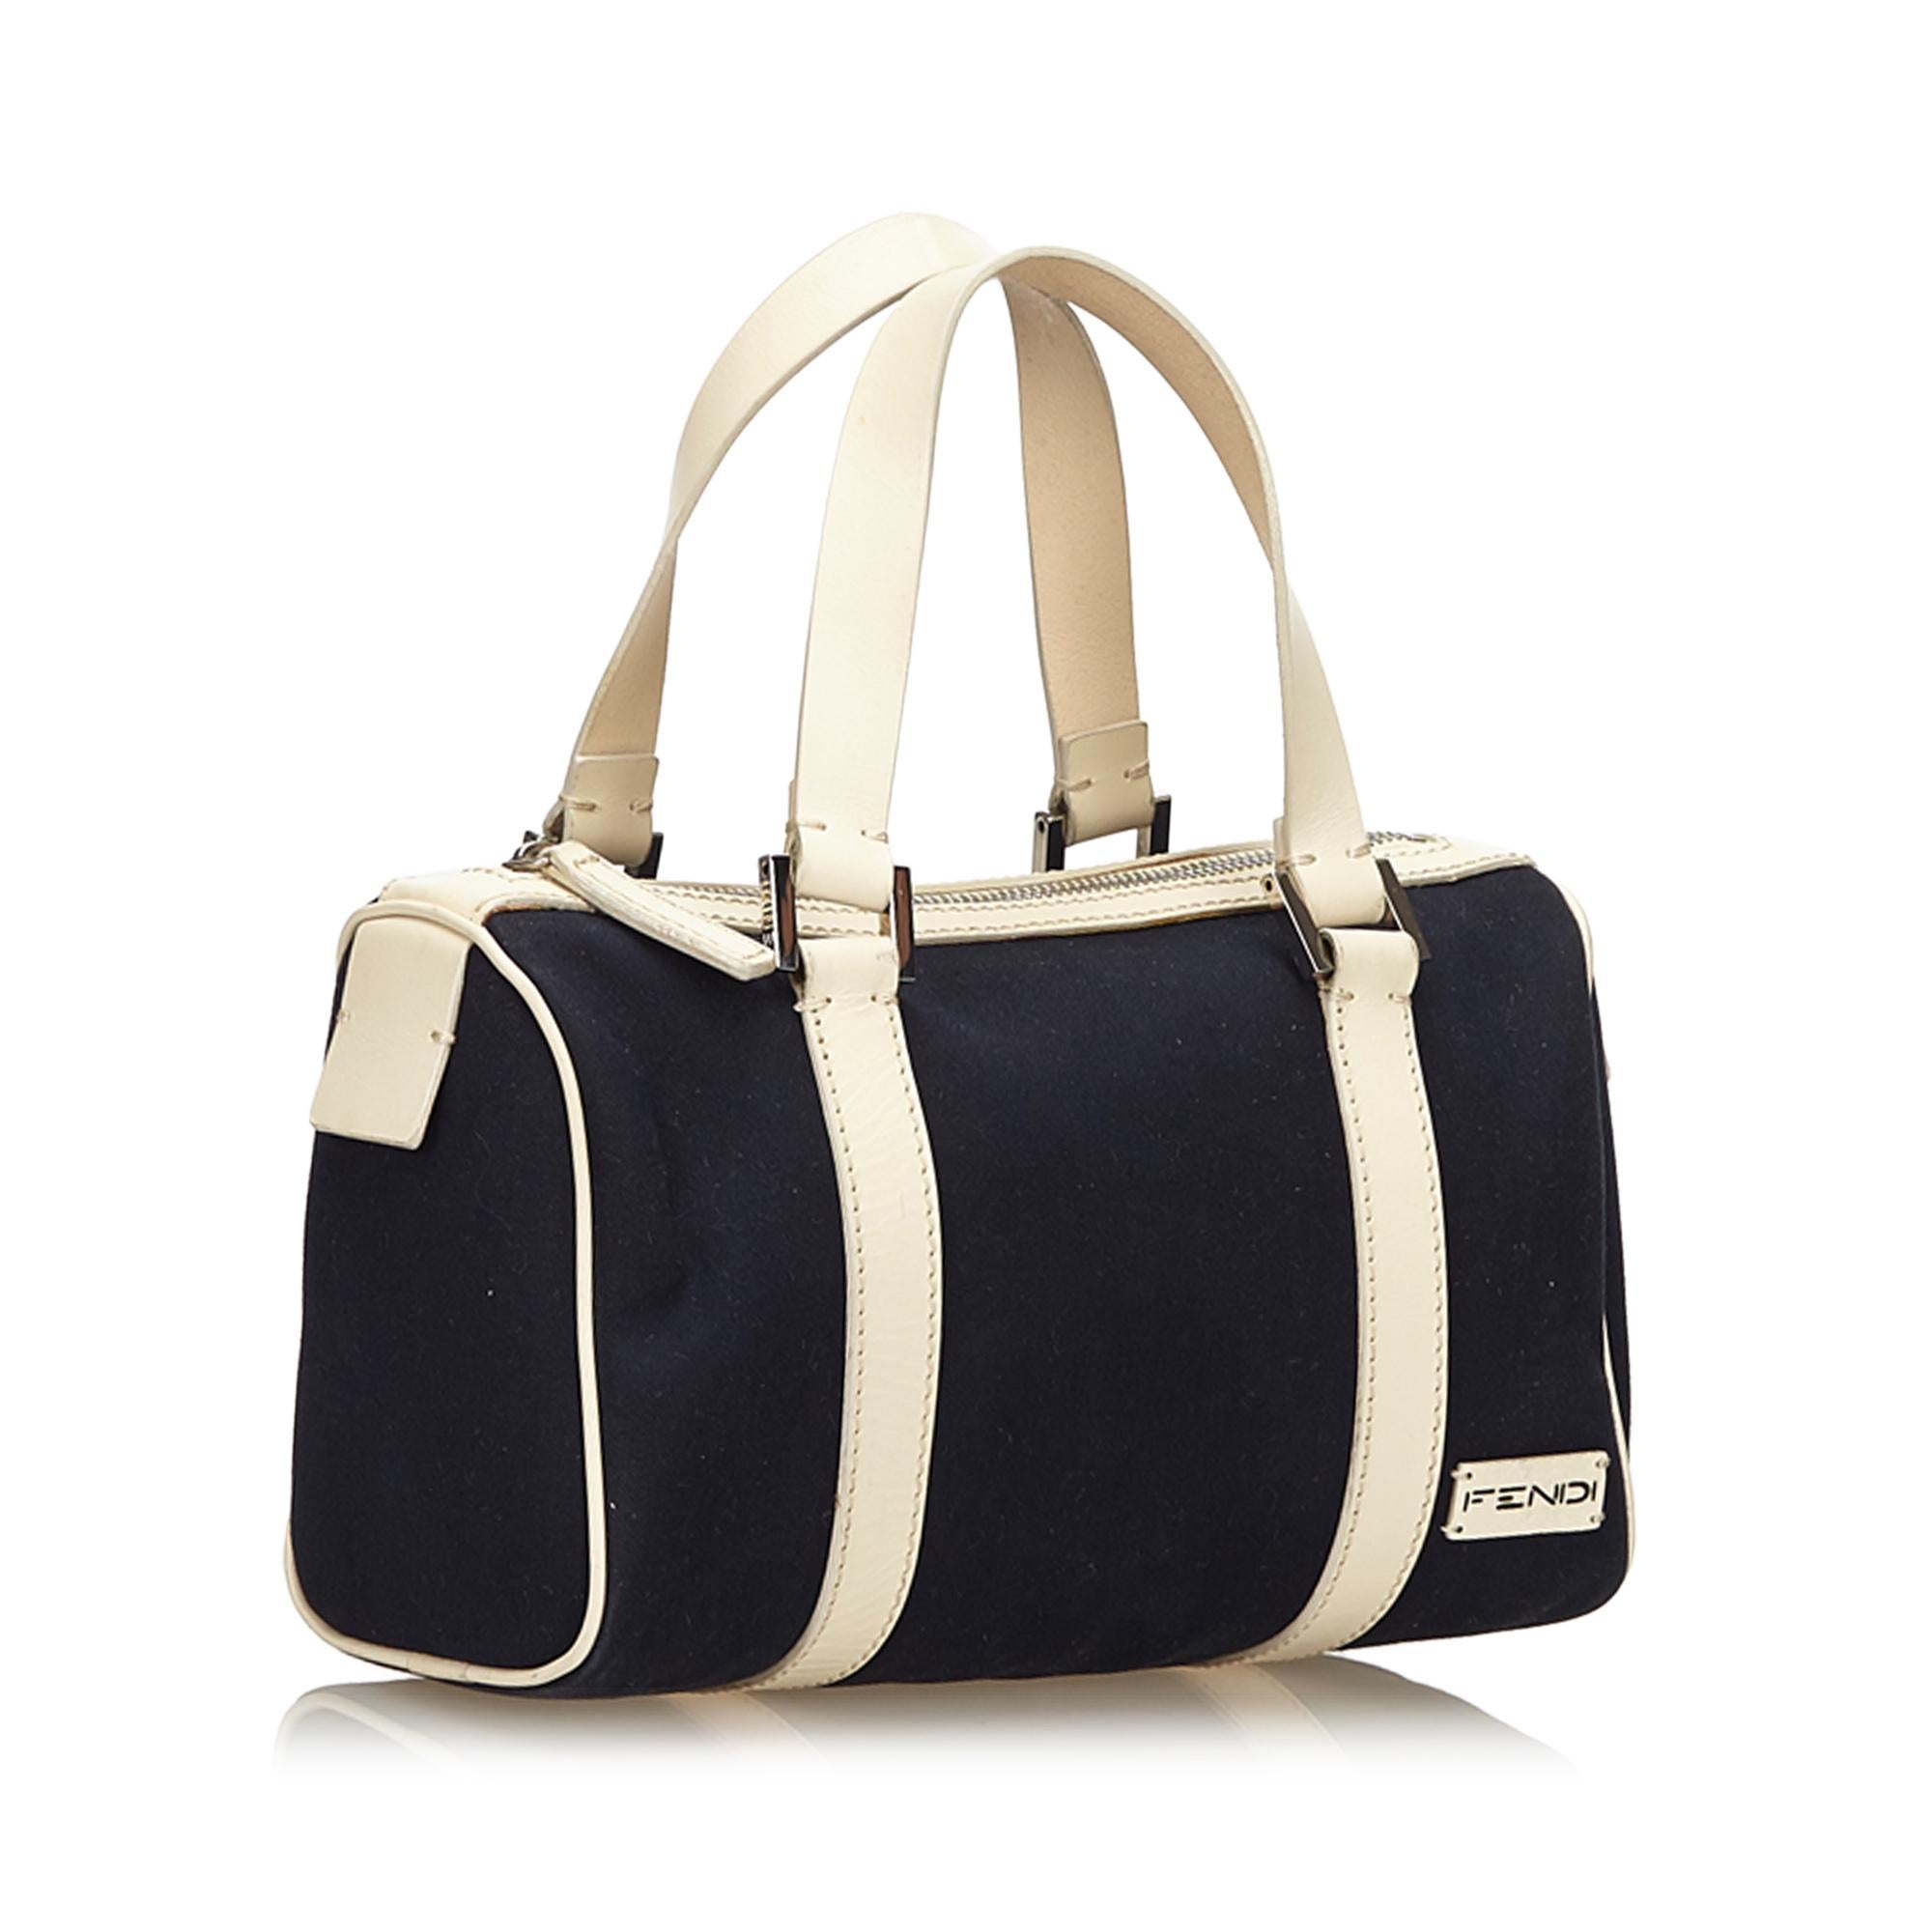 This boston bag features a canvas body with leather trim, flap leather handles, top zip closure, and an interior pocket. It carries as B+ condition rating.

Inclusions: 
This item does not come with inclusions.

Dimensions:
Length: 17.00 cm
Width: